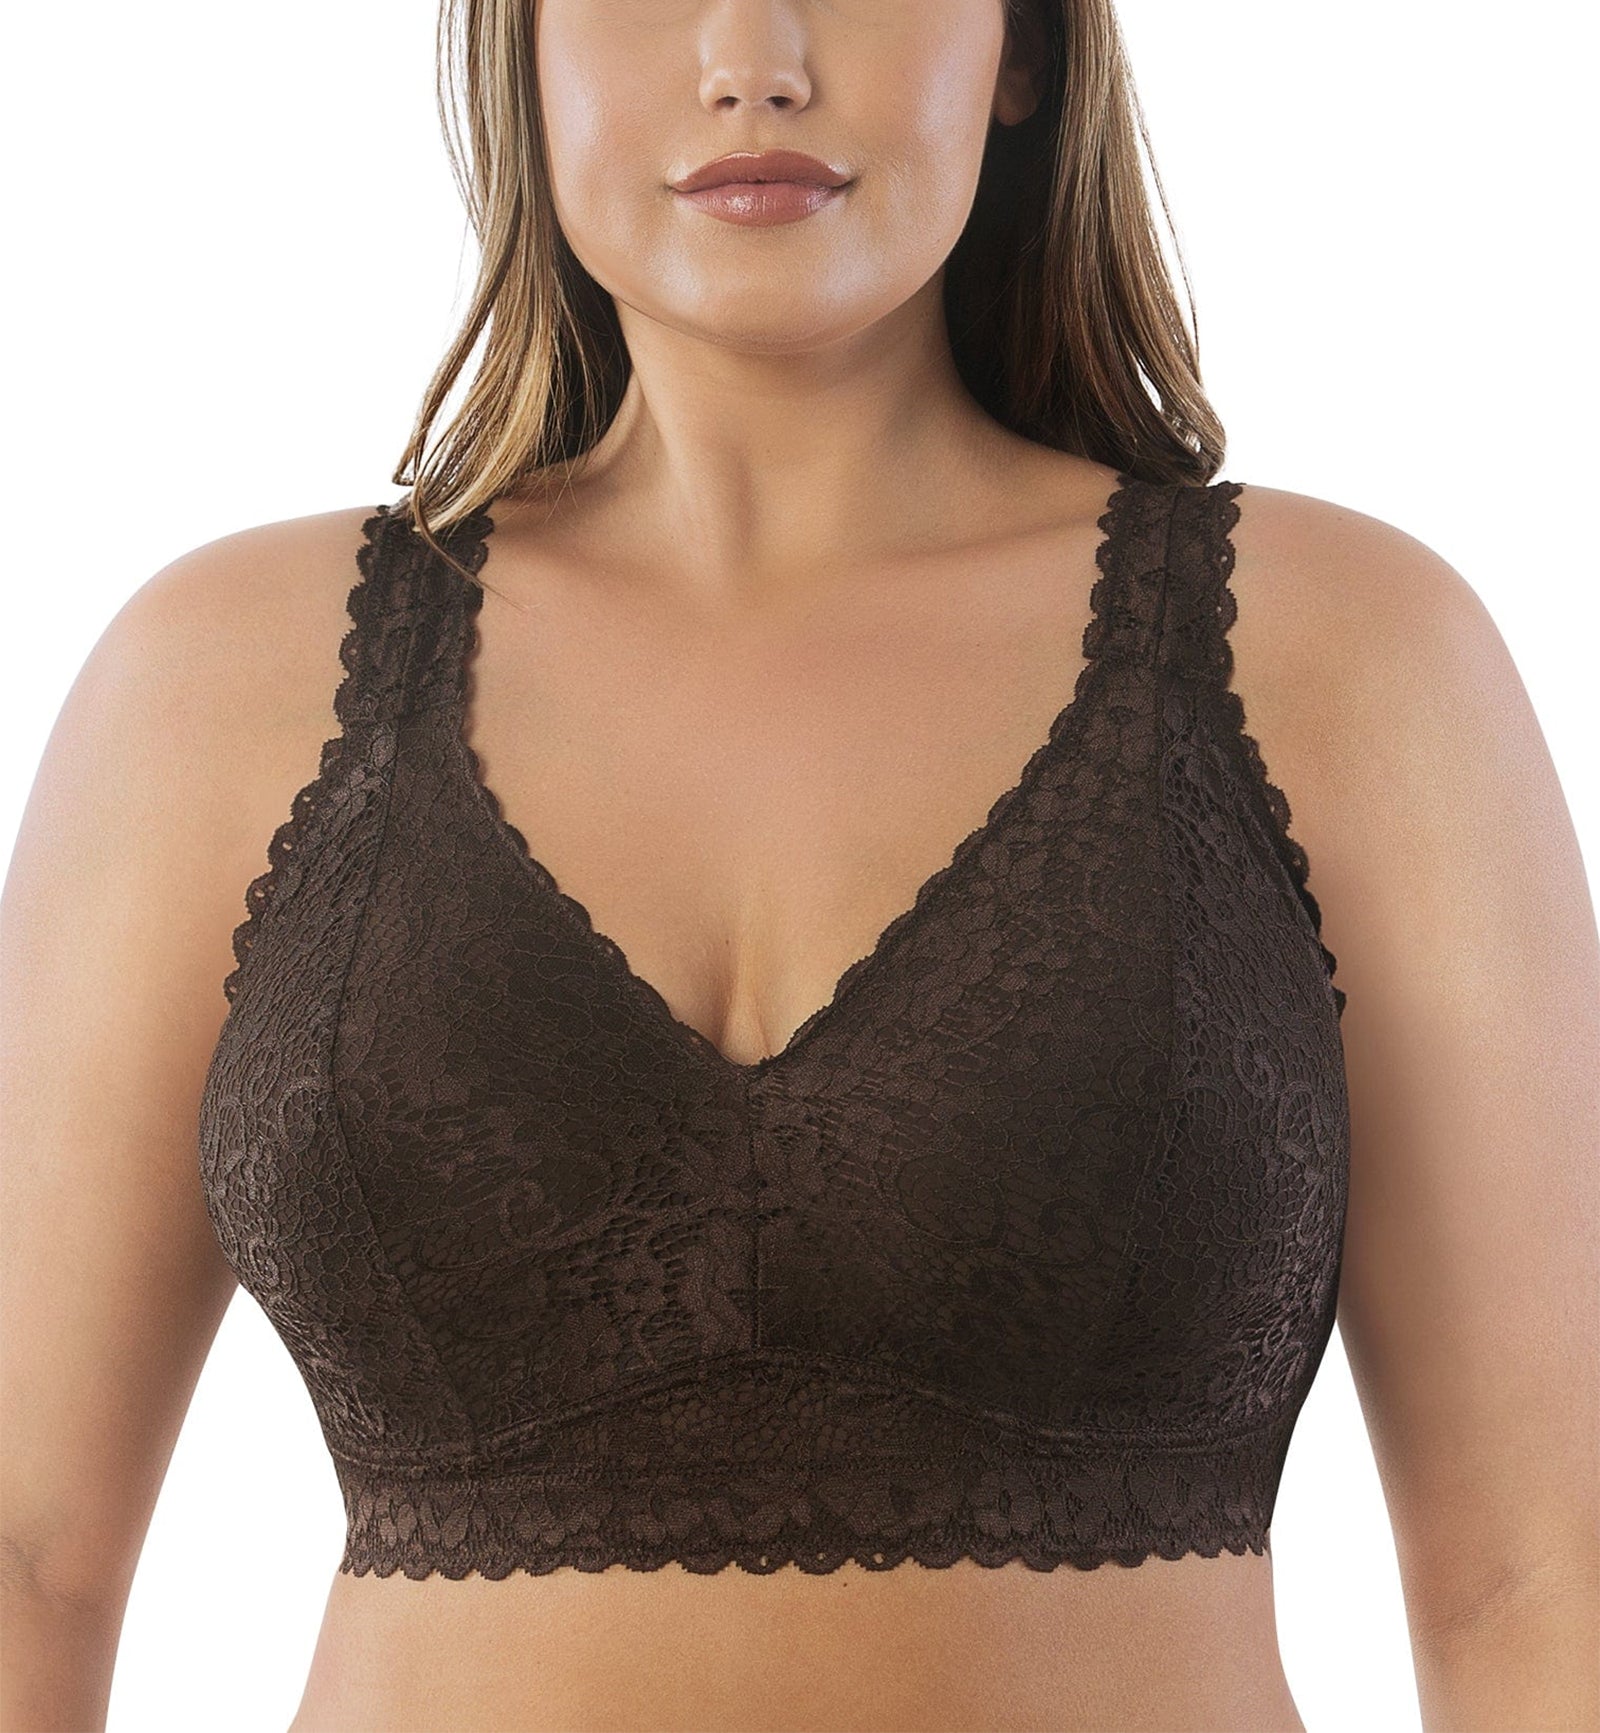 Parfait Adriana Banded Stretch Lace Wireless Bralette (P5482),30D,Deep Nude - Deep Nude,30D